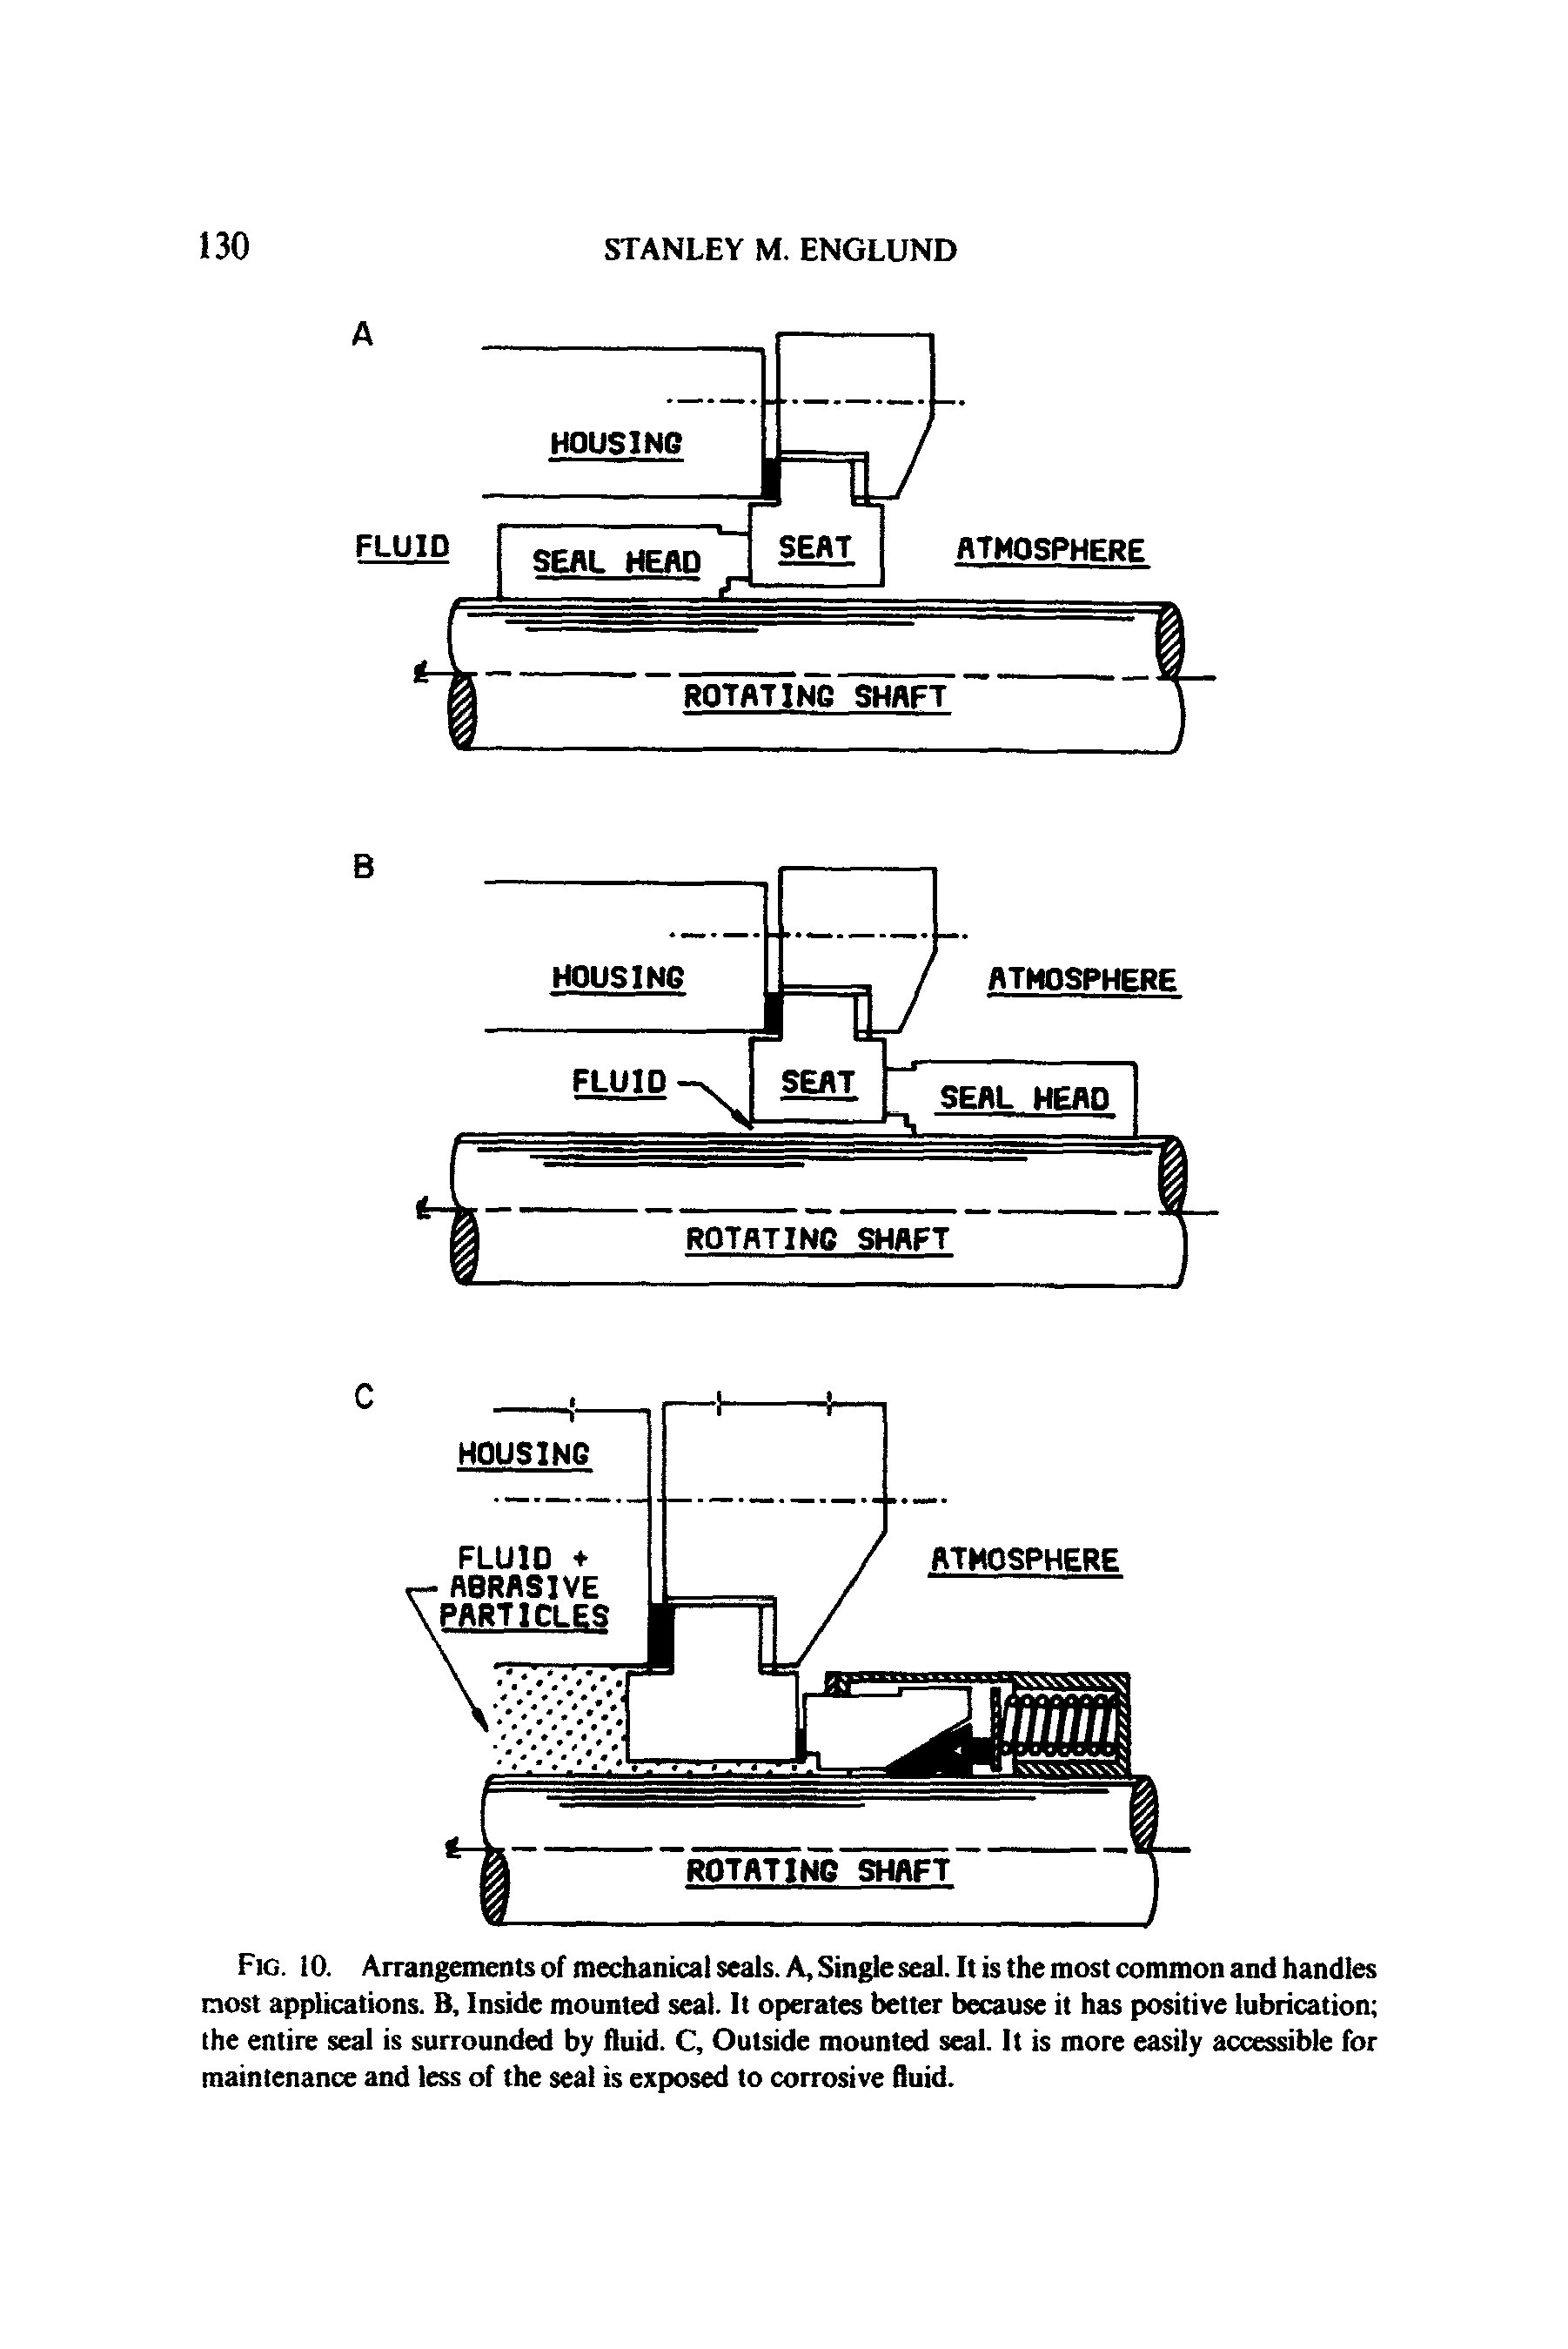 Fig. 10. Arrangements of mechanical seals. A, Single seal. It is the most common and handles most applications. B, Inside mounted seal. It operates better because it has positive lubrication the entire seal is surrounded by fluid. C, Outside mounted seal. It is more easily accessible for maintenance and less of the seal is exposed to corrosive fluid.